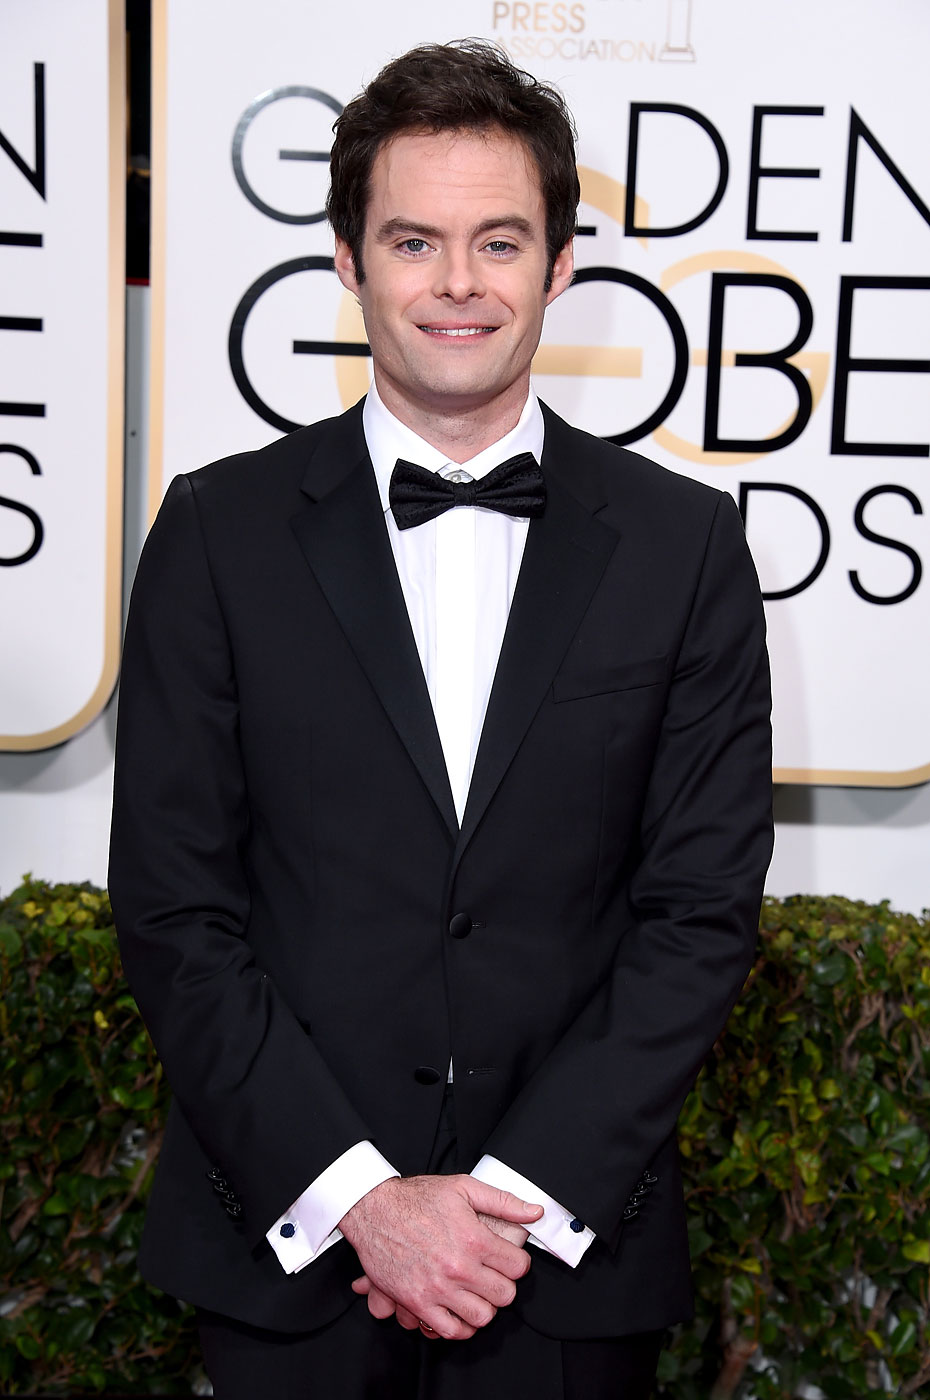 Bill Hader attends the 72nd Annual Golden Globe Awards at The Beverly Hilton Hotel on Jan. 11, 2015 in Beverly Hills, Calif.